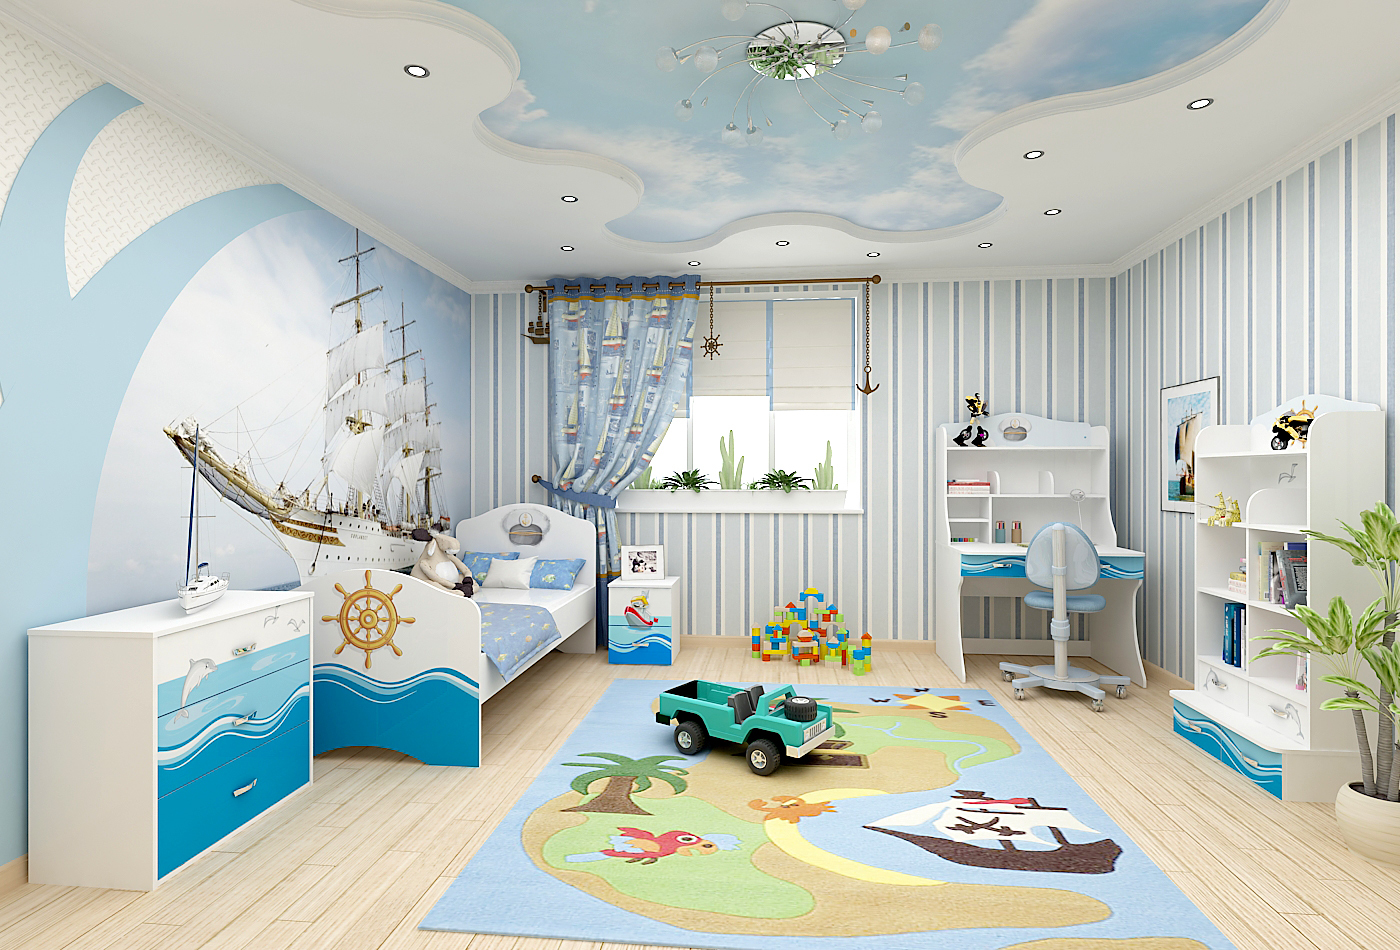 Marine style of design of a children's room with photo wallpaper and bright decor